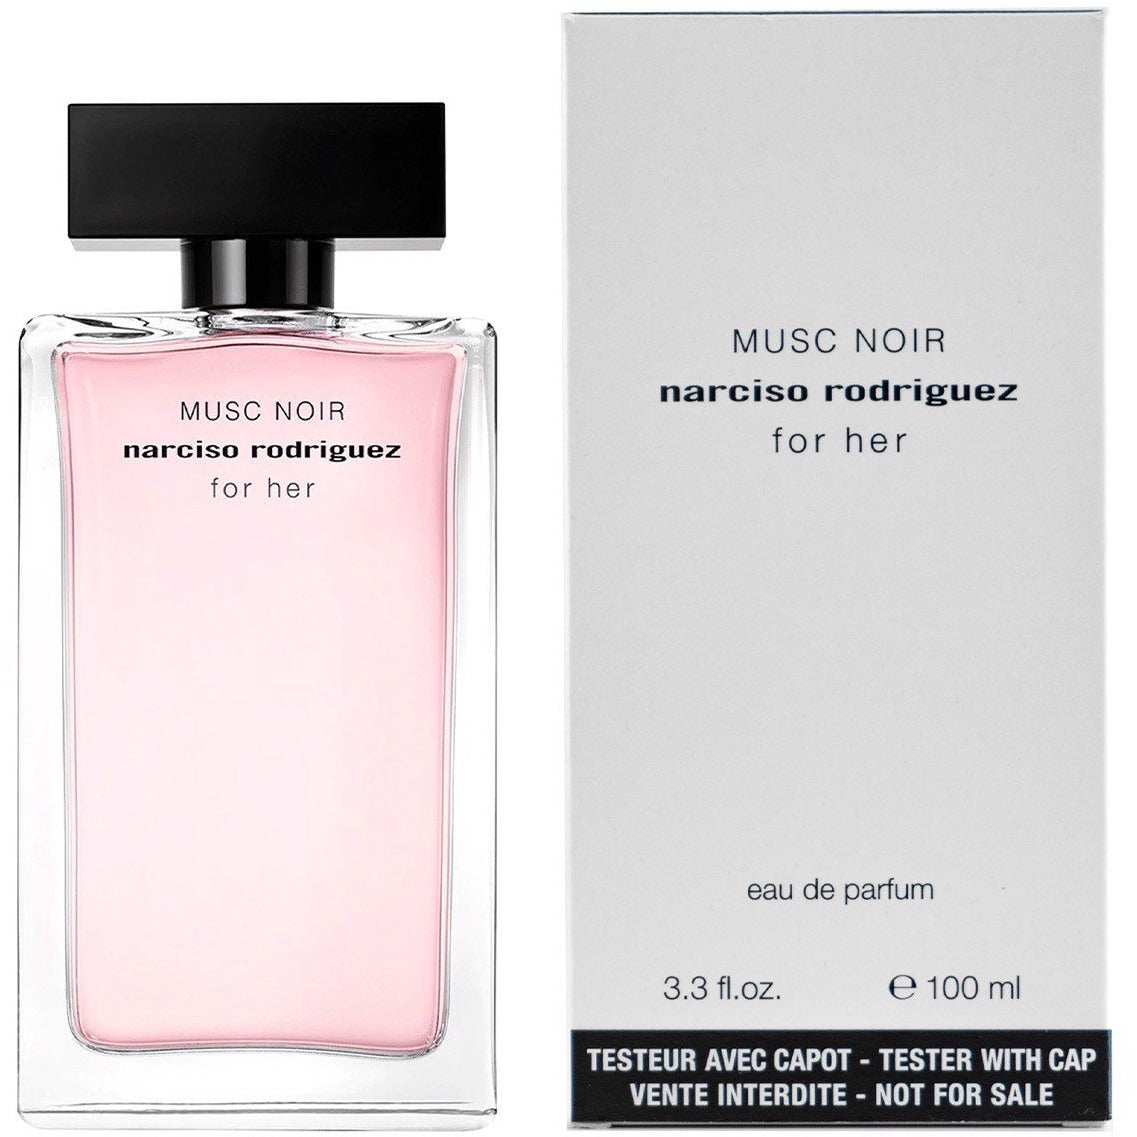 narciso-rodriguez-musc-noir-tester-perfume.